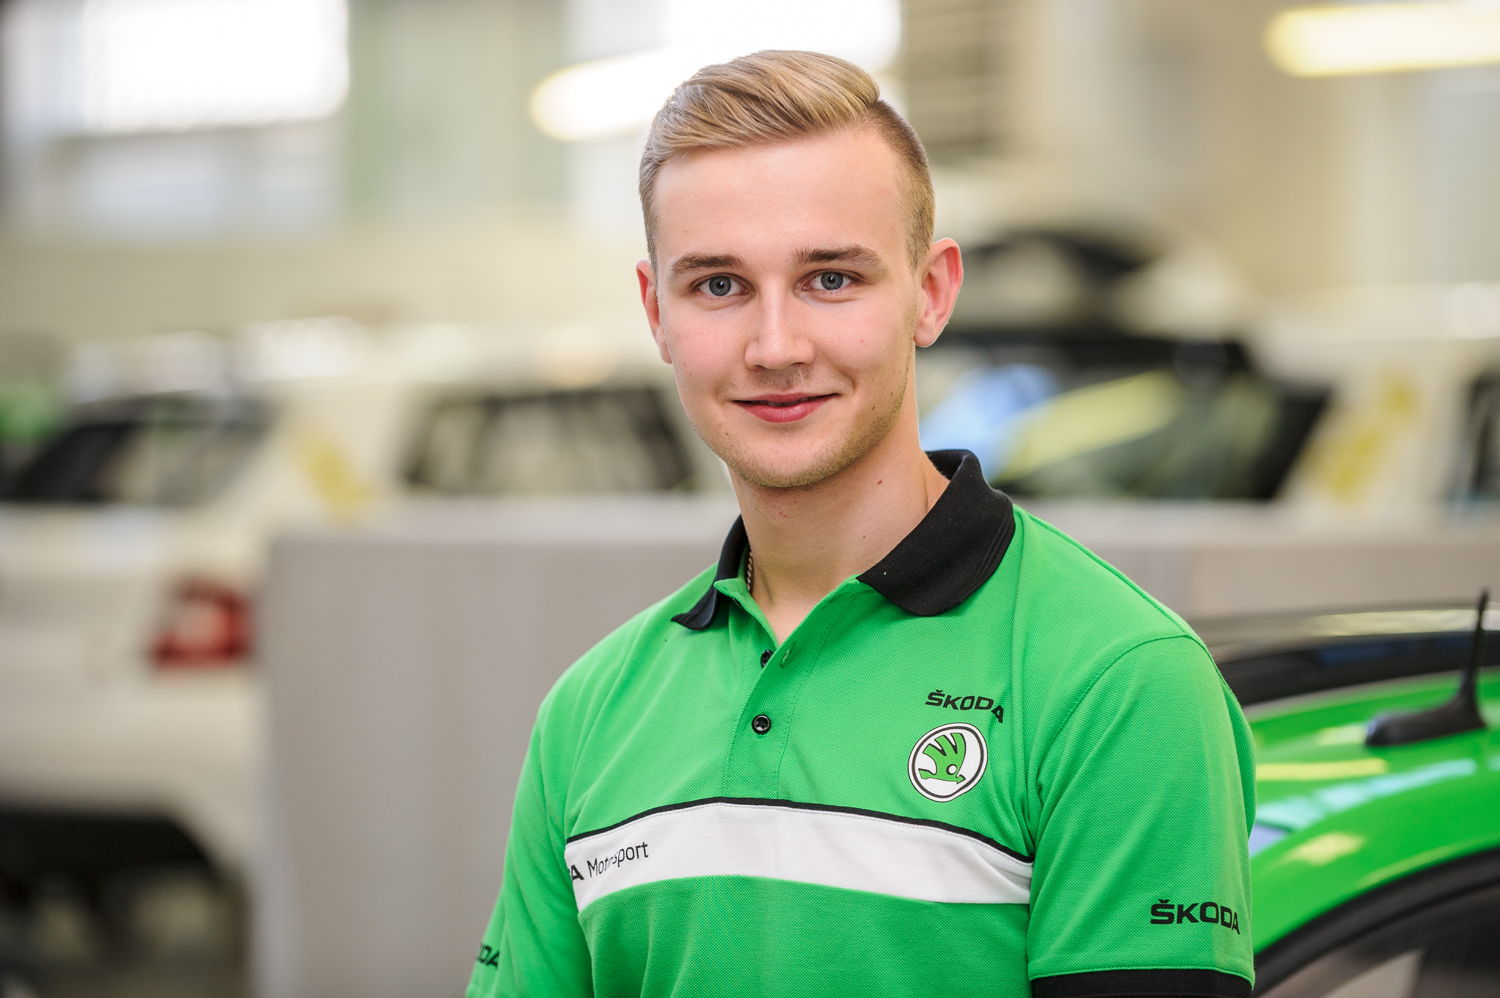 Juuso Nordgren is the first of talented young drivers to be tested by ŠKODA Motorsport. He will compete in Spain in a ŠKODA FABIA R5.